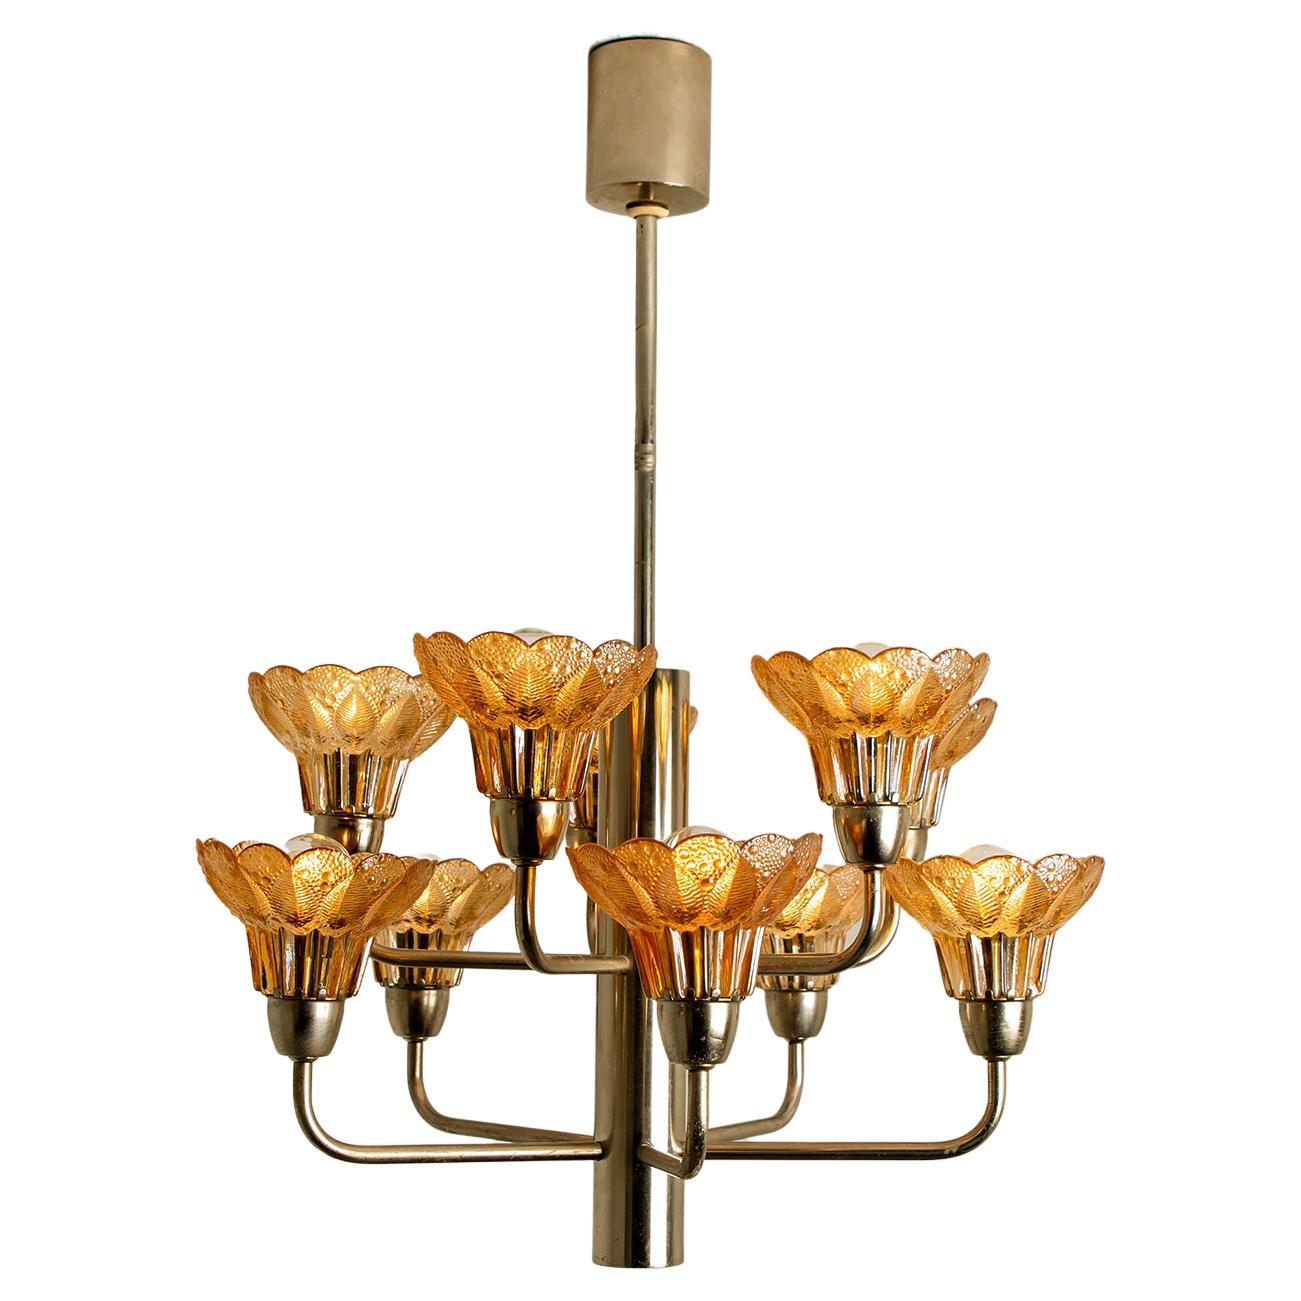 This ceiling light was designed by Simon and Schelle, featuring a rectangular chrome base and four massive glasses in the shape of a four lobed flower. 

Dimensions:
Height only the fixture 13,8 inch (35 cm) overall height 26 inch (66 cm) 
diameter